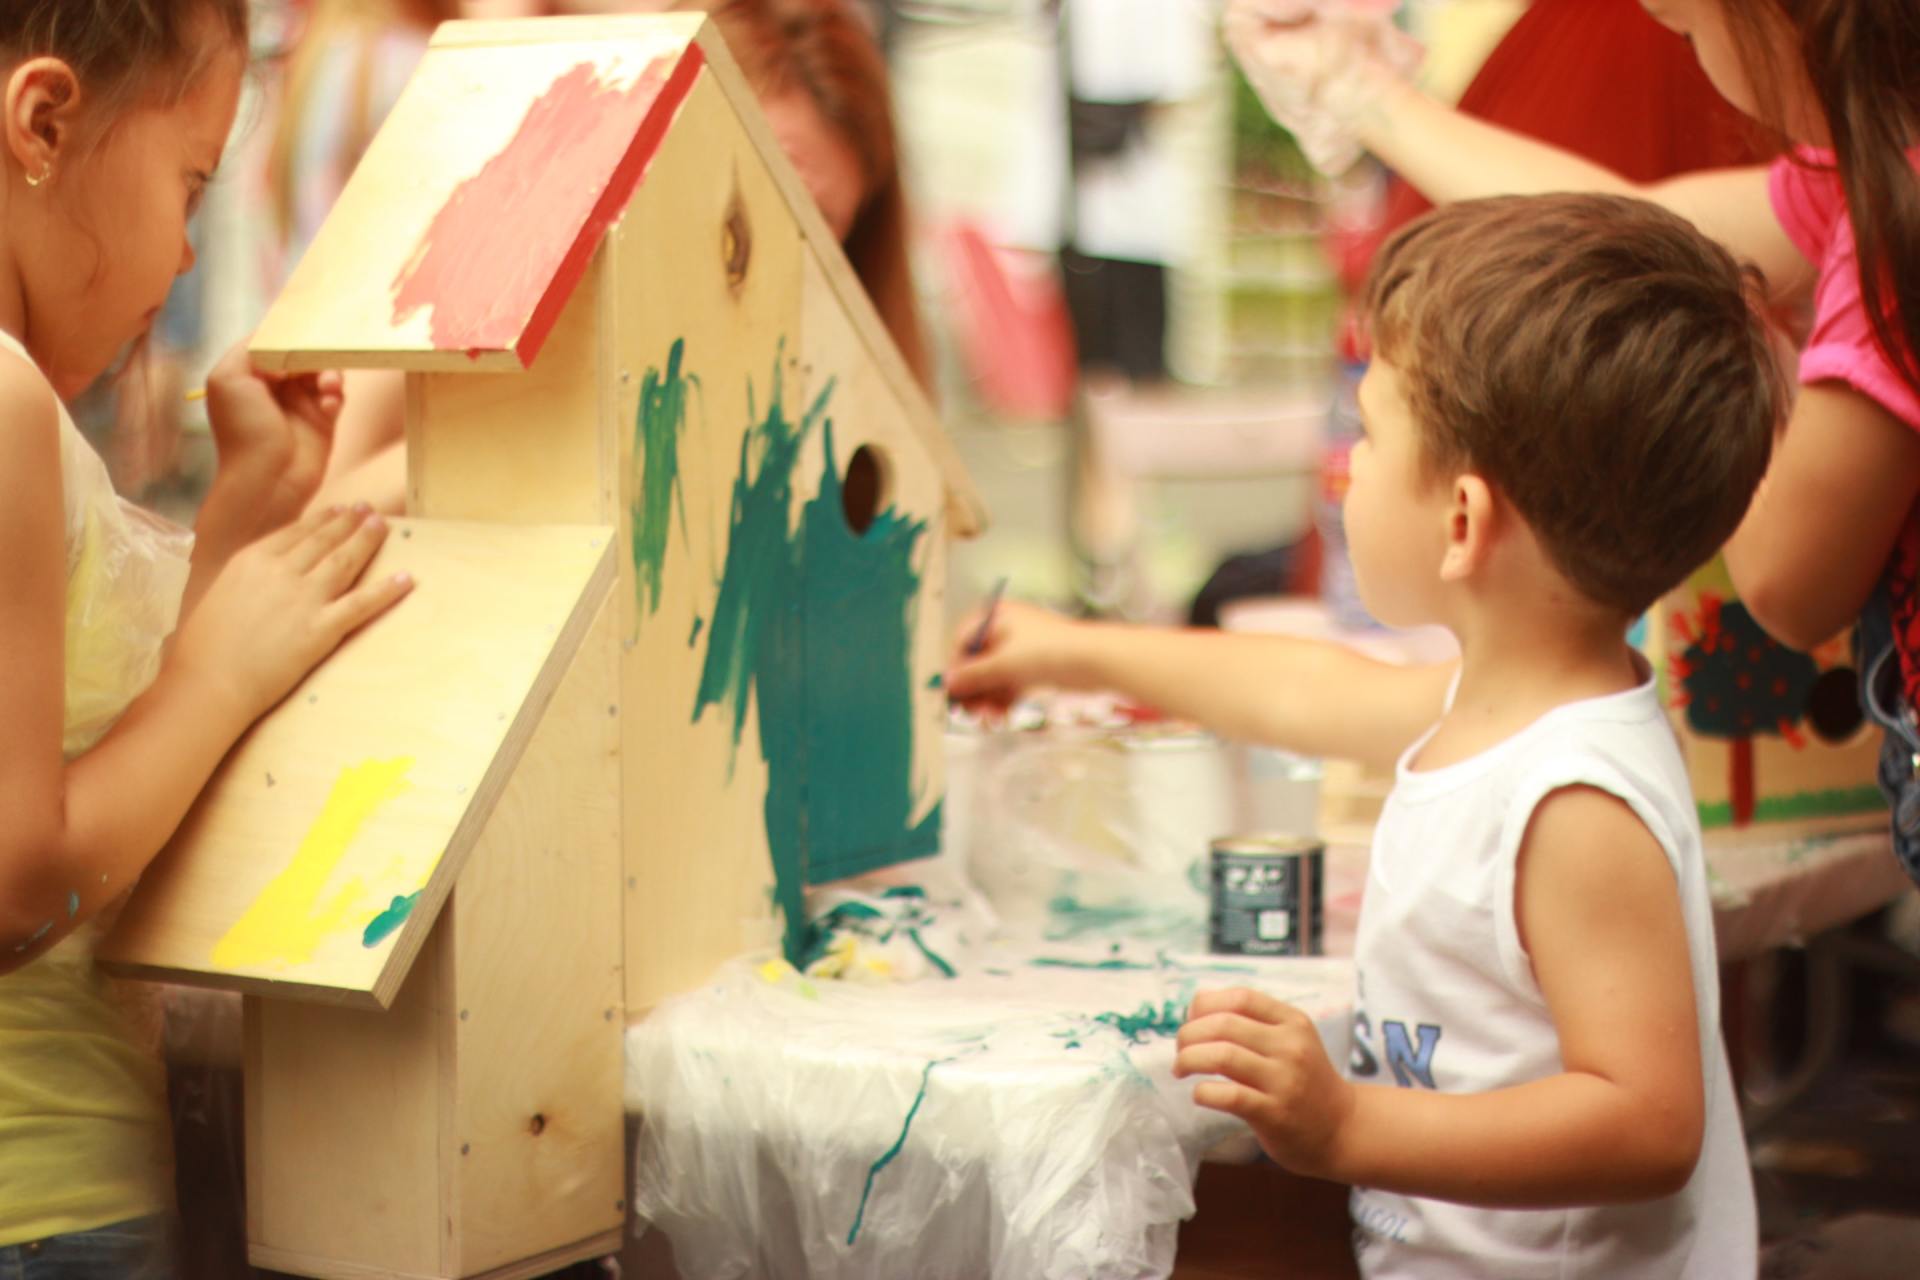 Young boy painting a small wooden bird box with paint